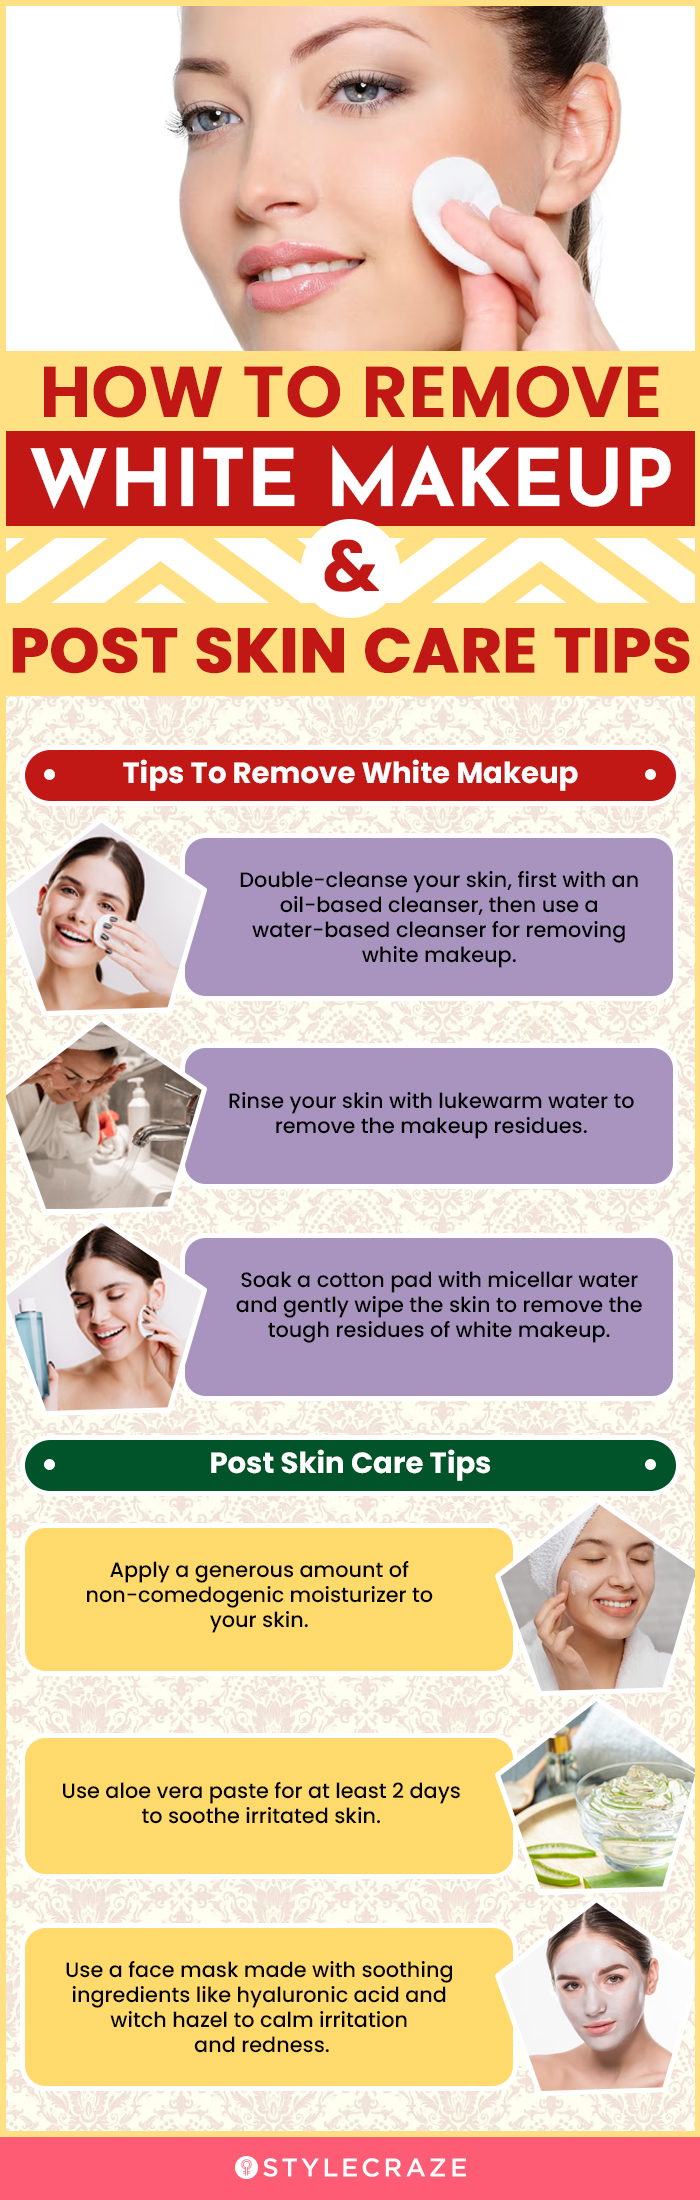 How To Remove White Makeup & Post Skin Care Tips (infographic)